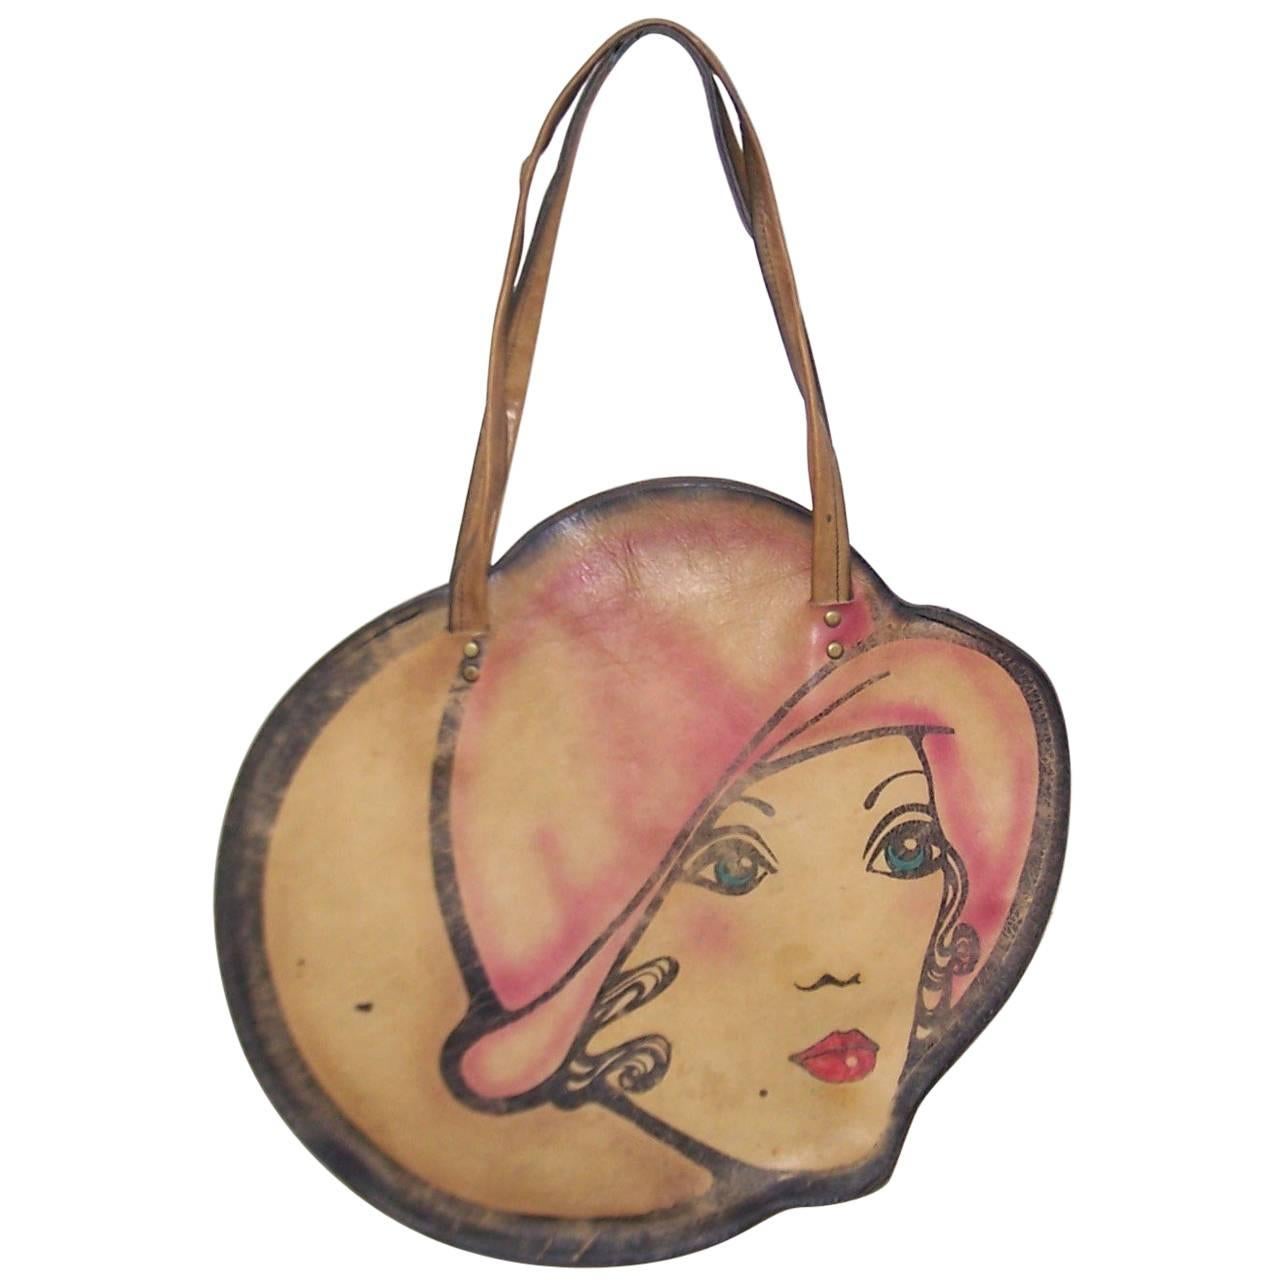 Mod 1960's Hand Painted Leather Handbag With Flapper Girl